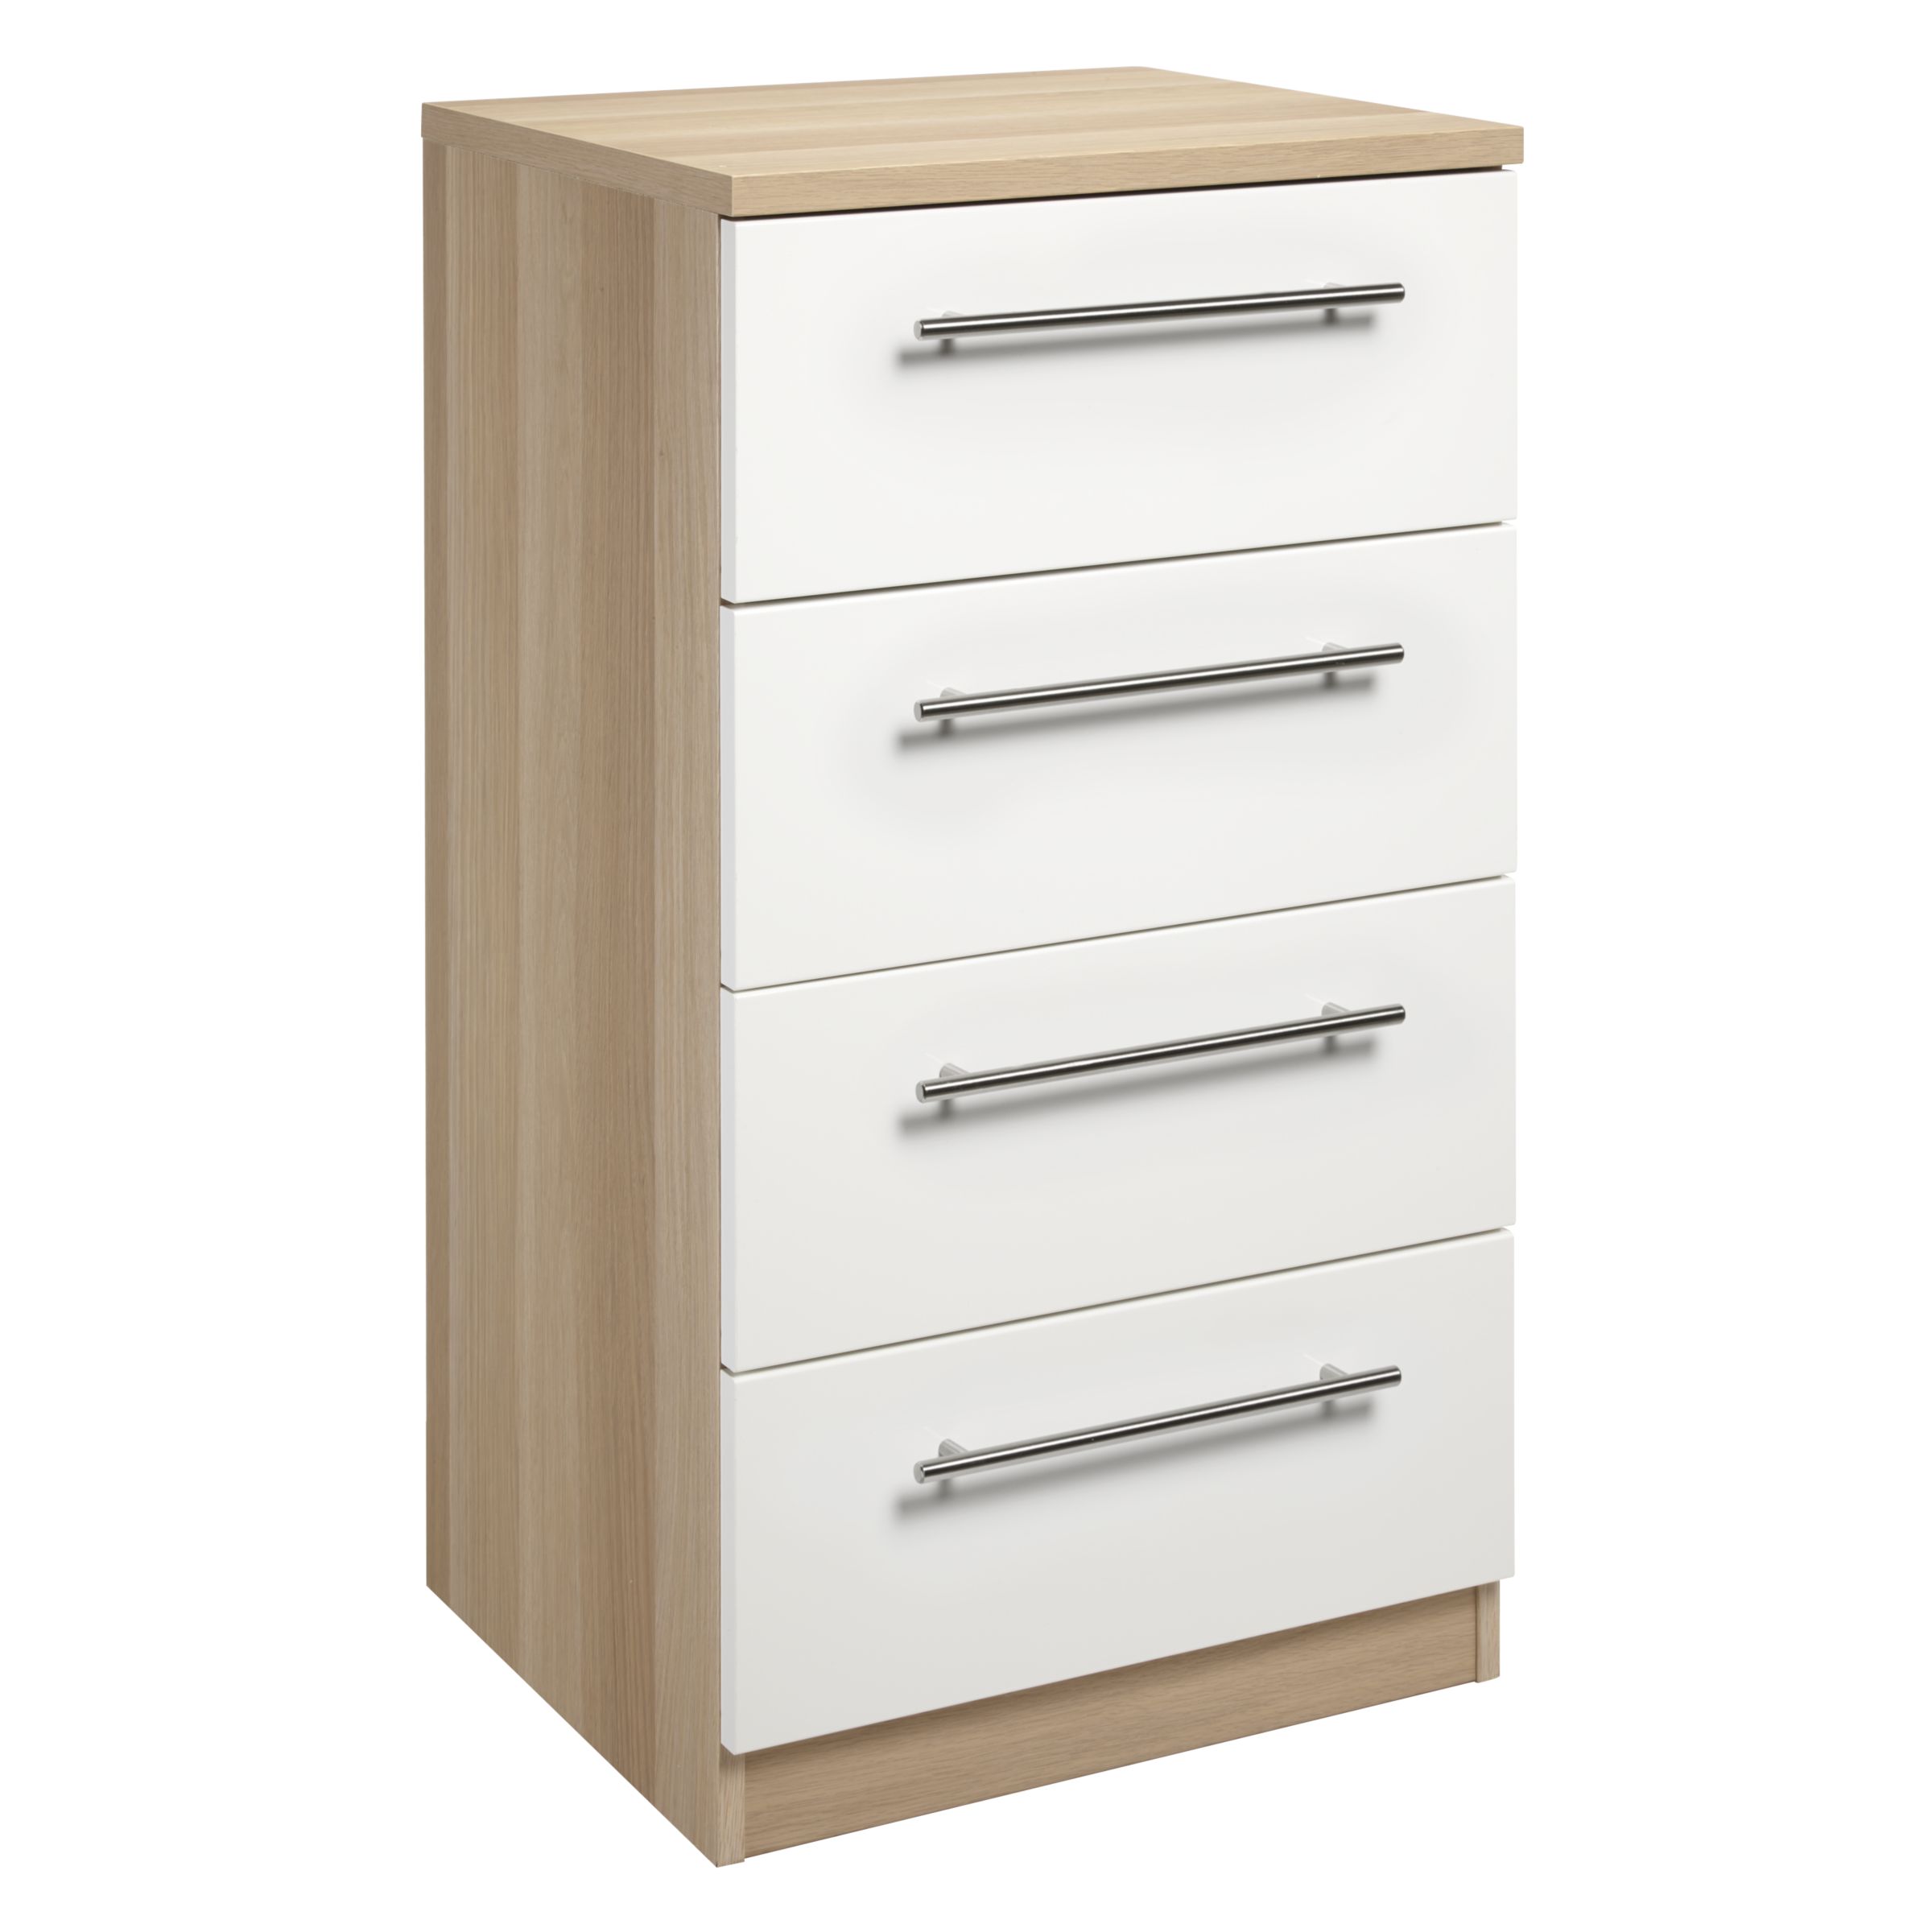 Photo of John lewis anyday mix it t-bar handle narrow 4 drawer chest gloss white/natural oak